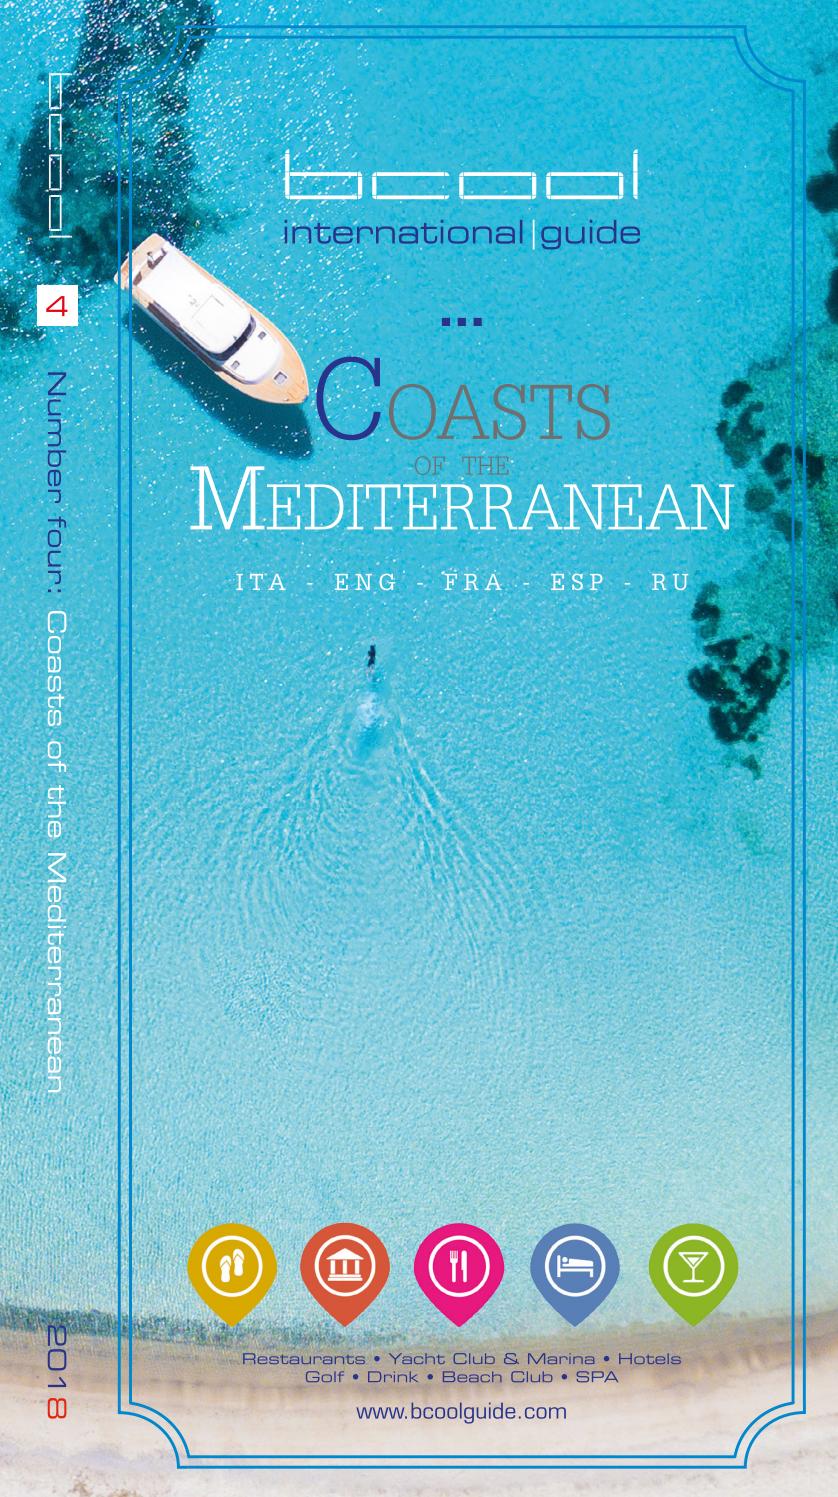 Table De Jardin 8 Places Inspirant 2018 Bcool Guide "coasts Of the Mediterrean" by Bcool City